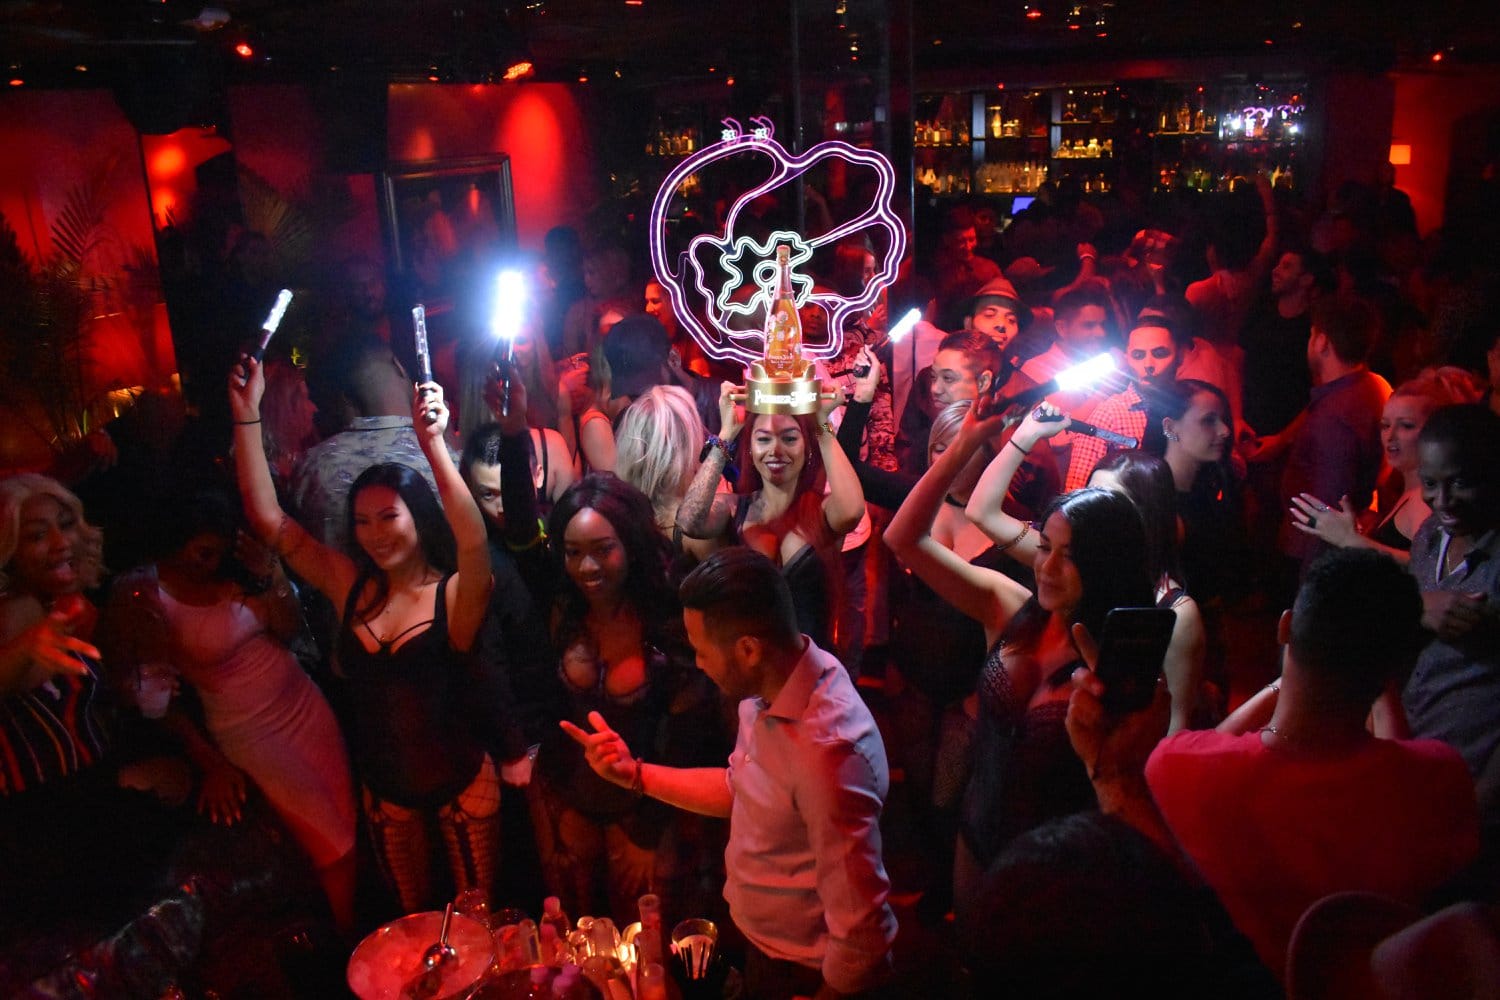 Las Vegas Nightlife Drais after hours lounge party